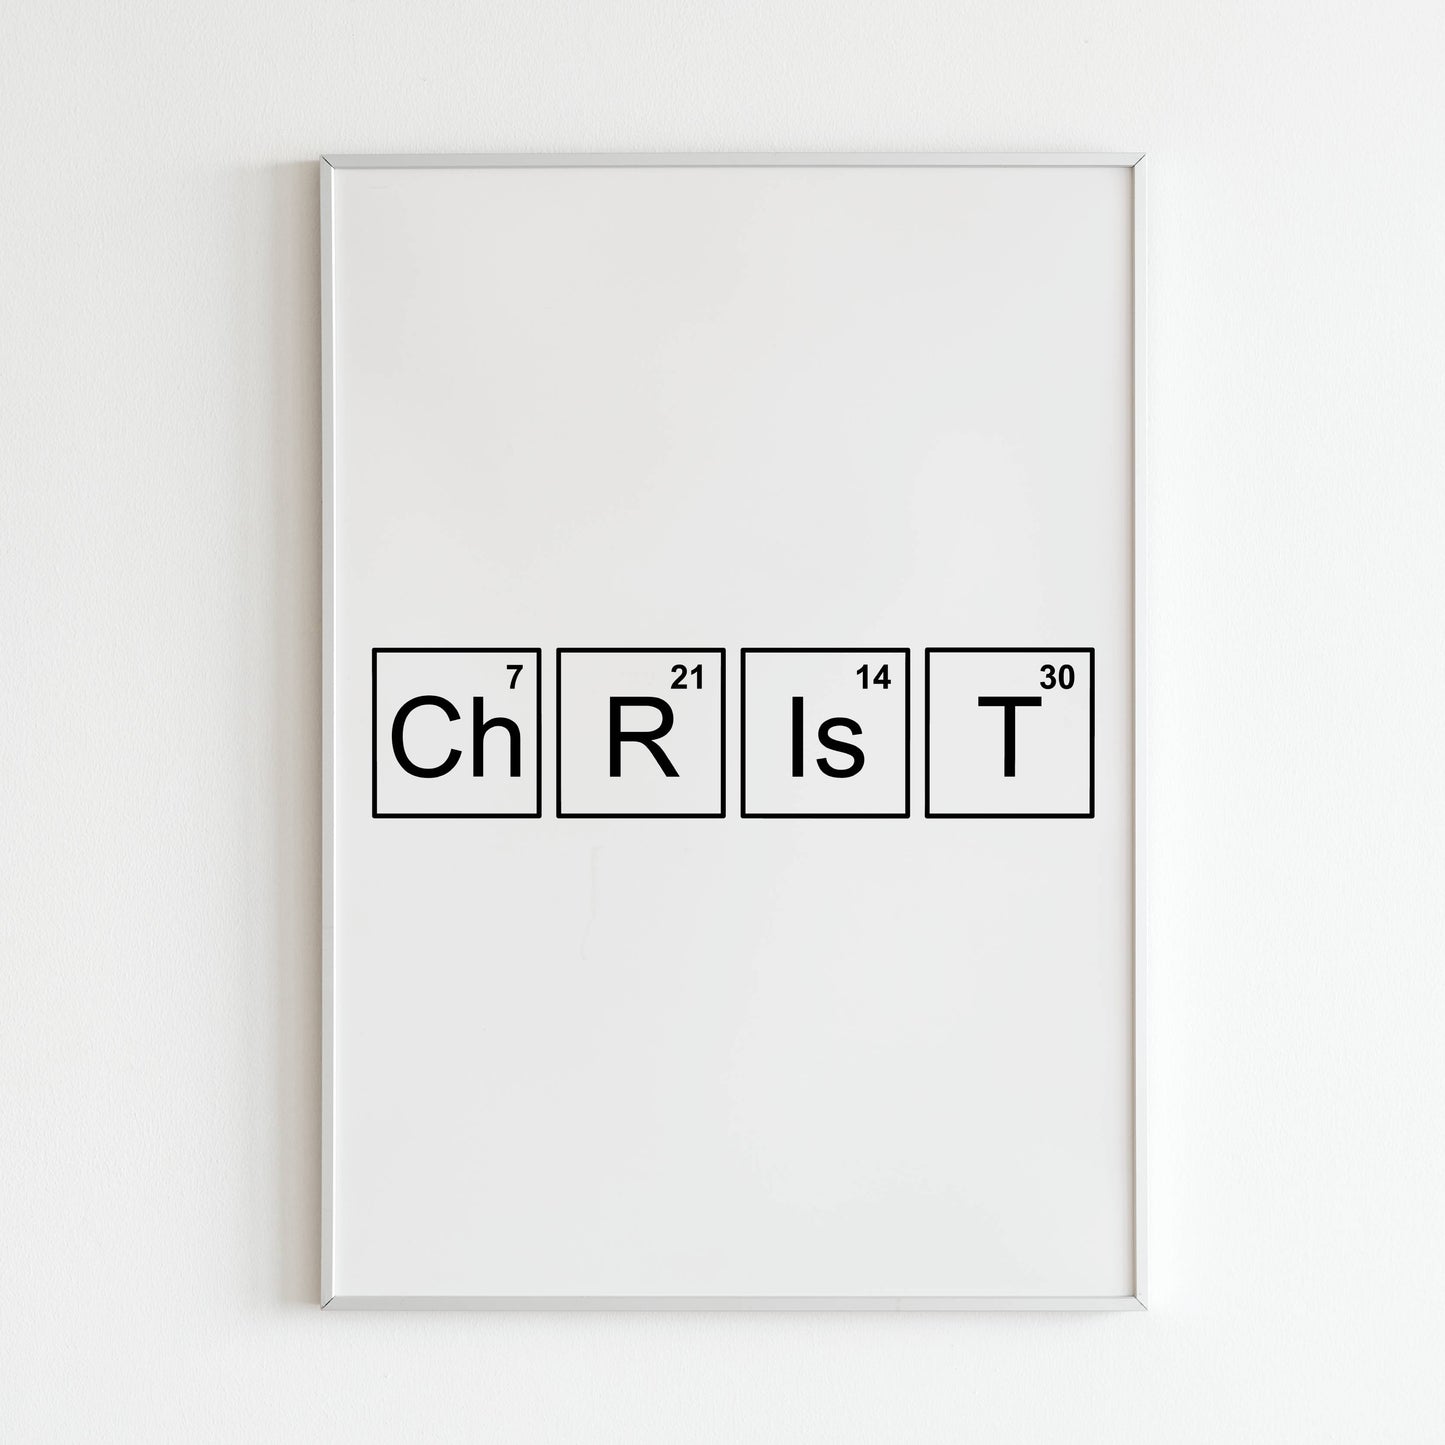 Downloadable "Christ" wall art for a message of faith.